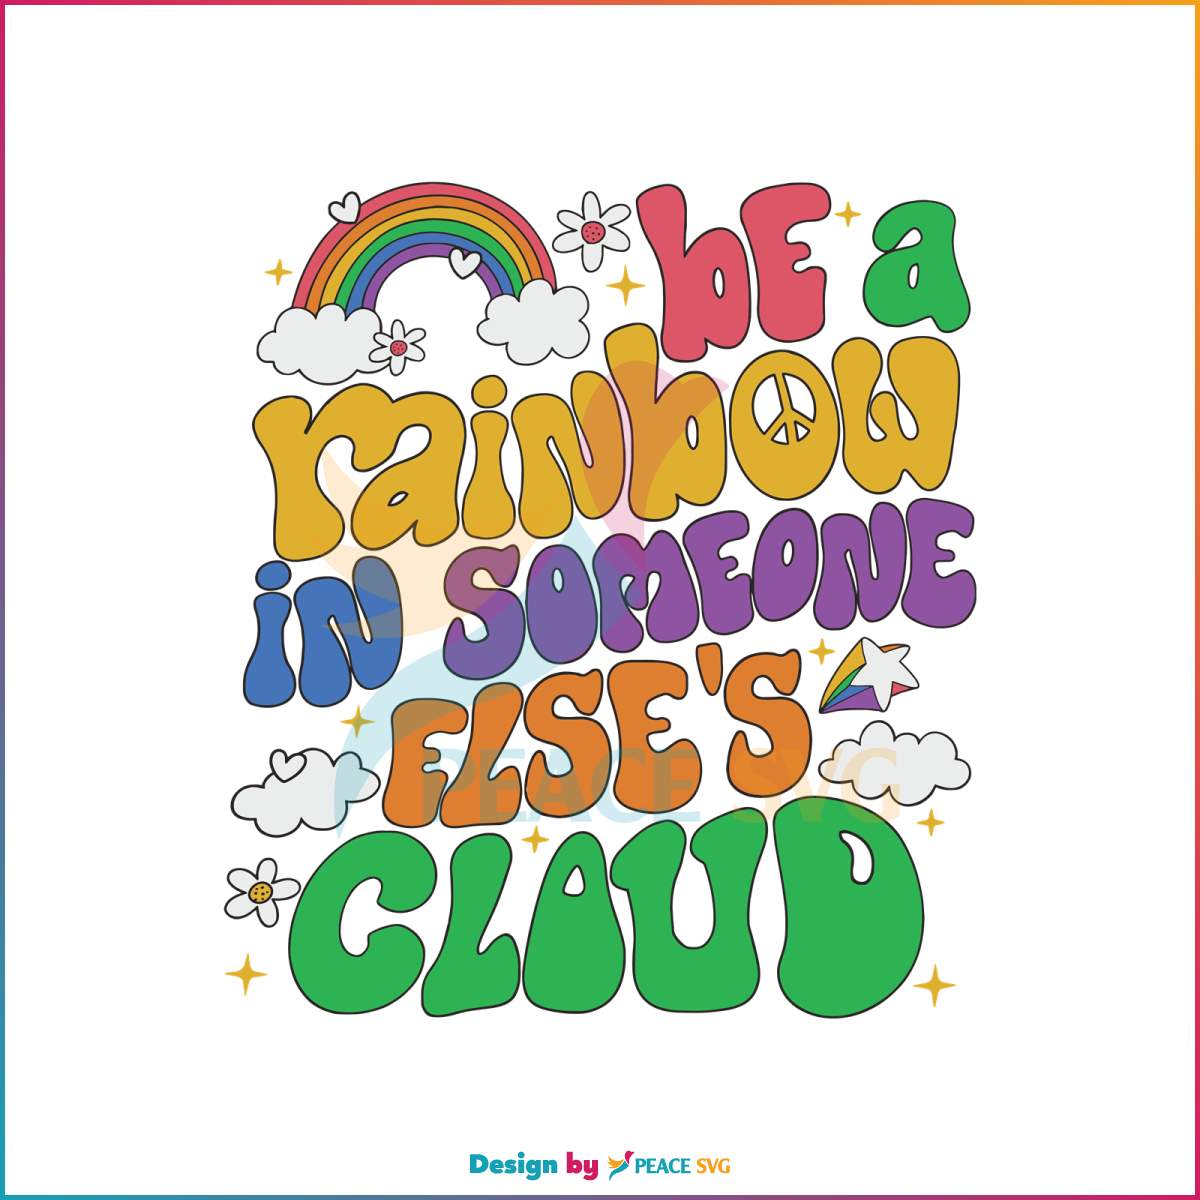 be-a-rainbow-in-someone-else-cloud-svg-cutting-digital-file